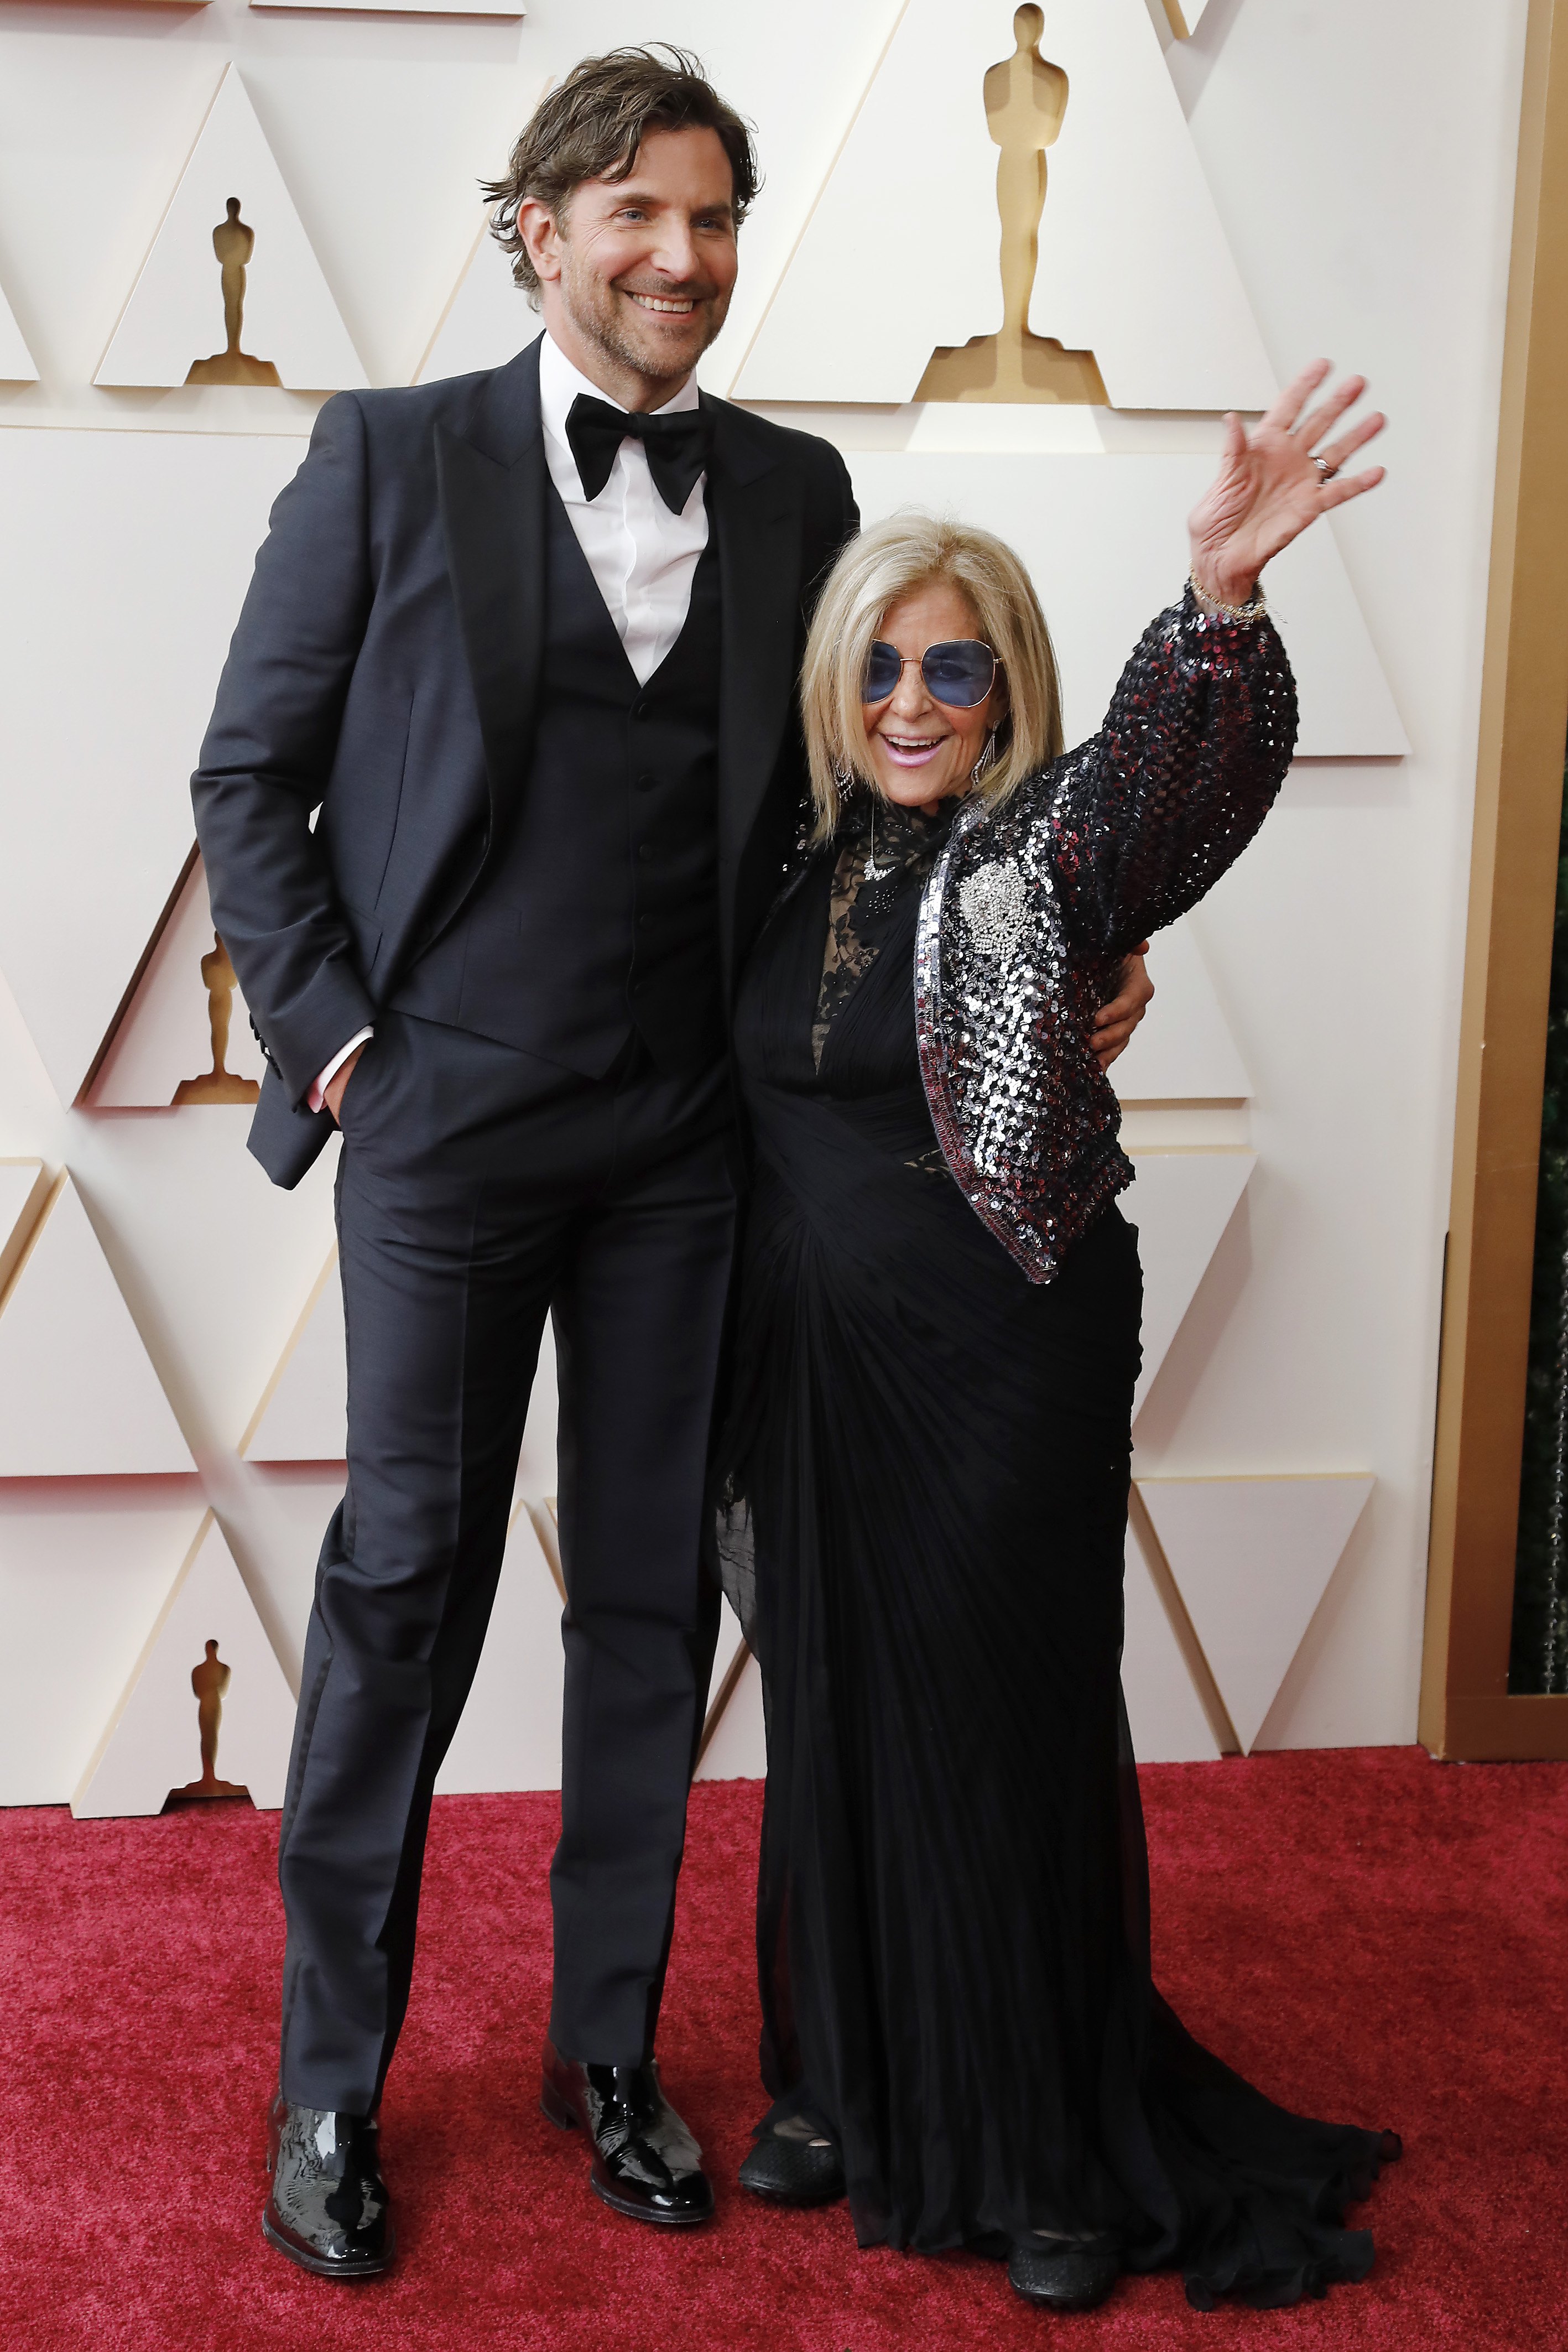 Bradley Cooper and Gloria Campano at the 94th Annual Oscar Awards in 2022 | Source: Getty Images